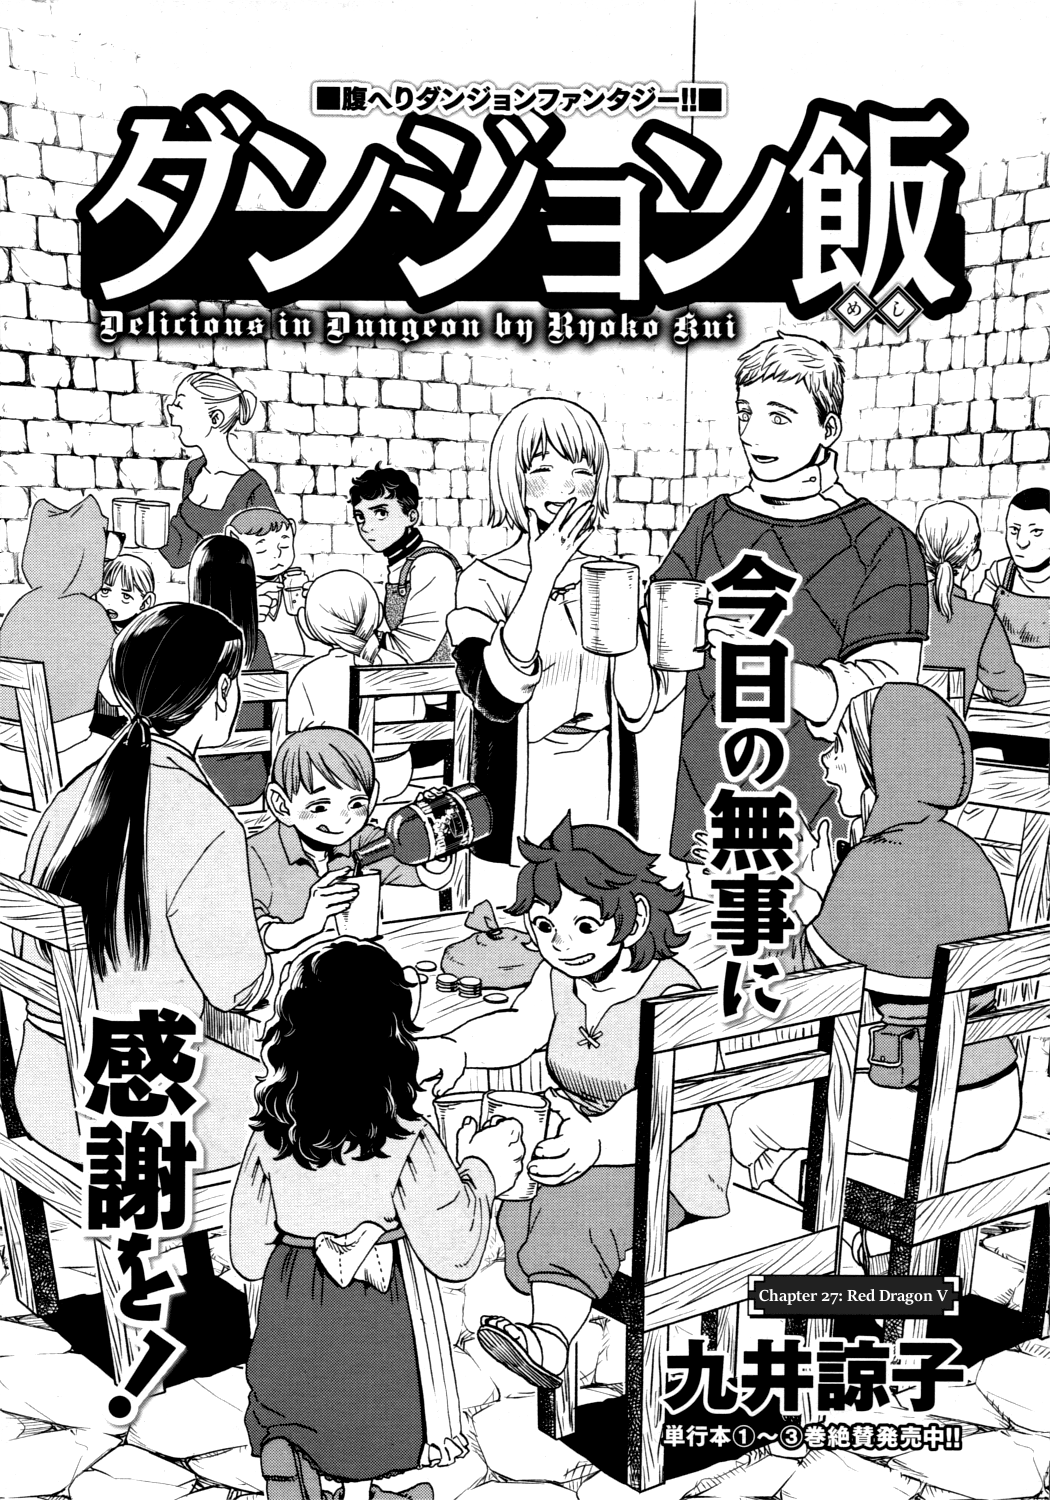 Dungeon Meshi Vol.4-Chapter.27-Red-Dragon-V Image